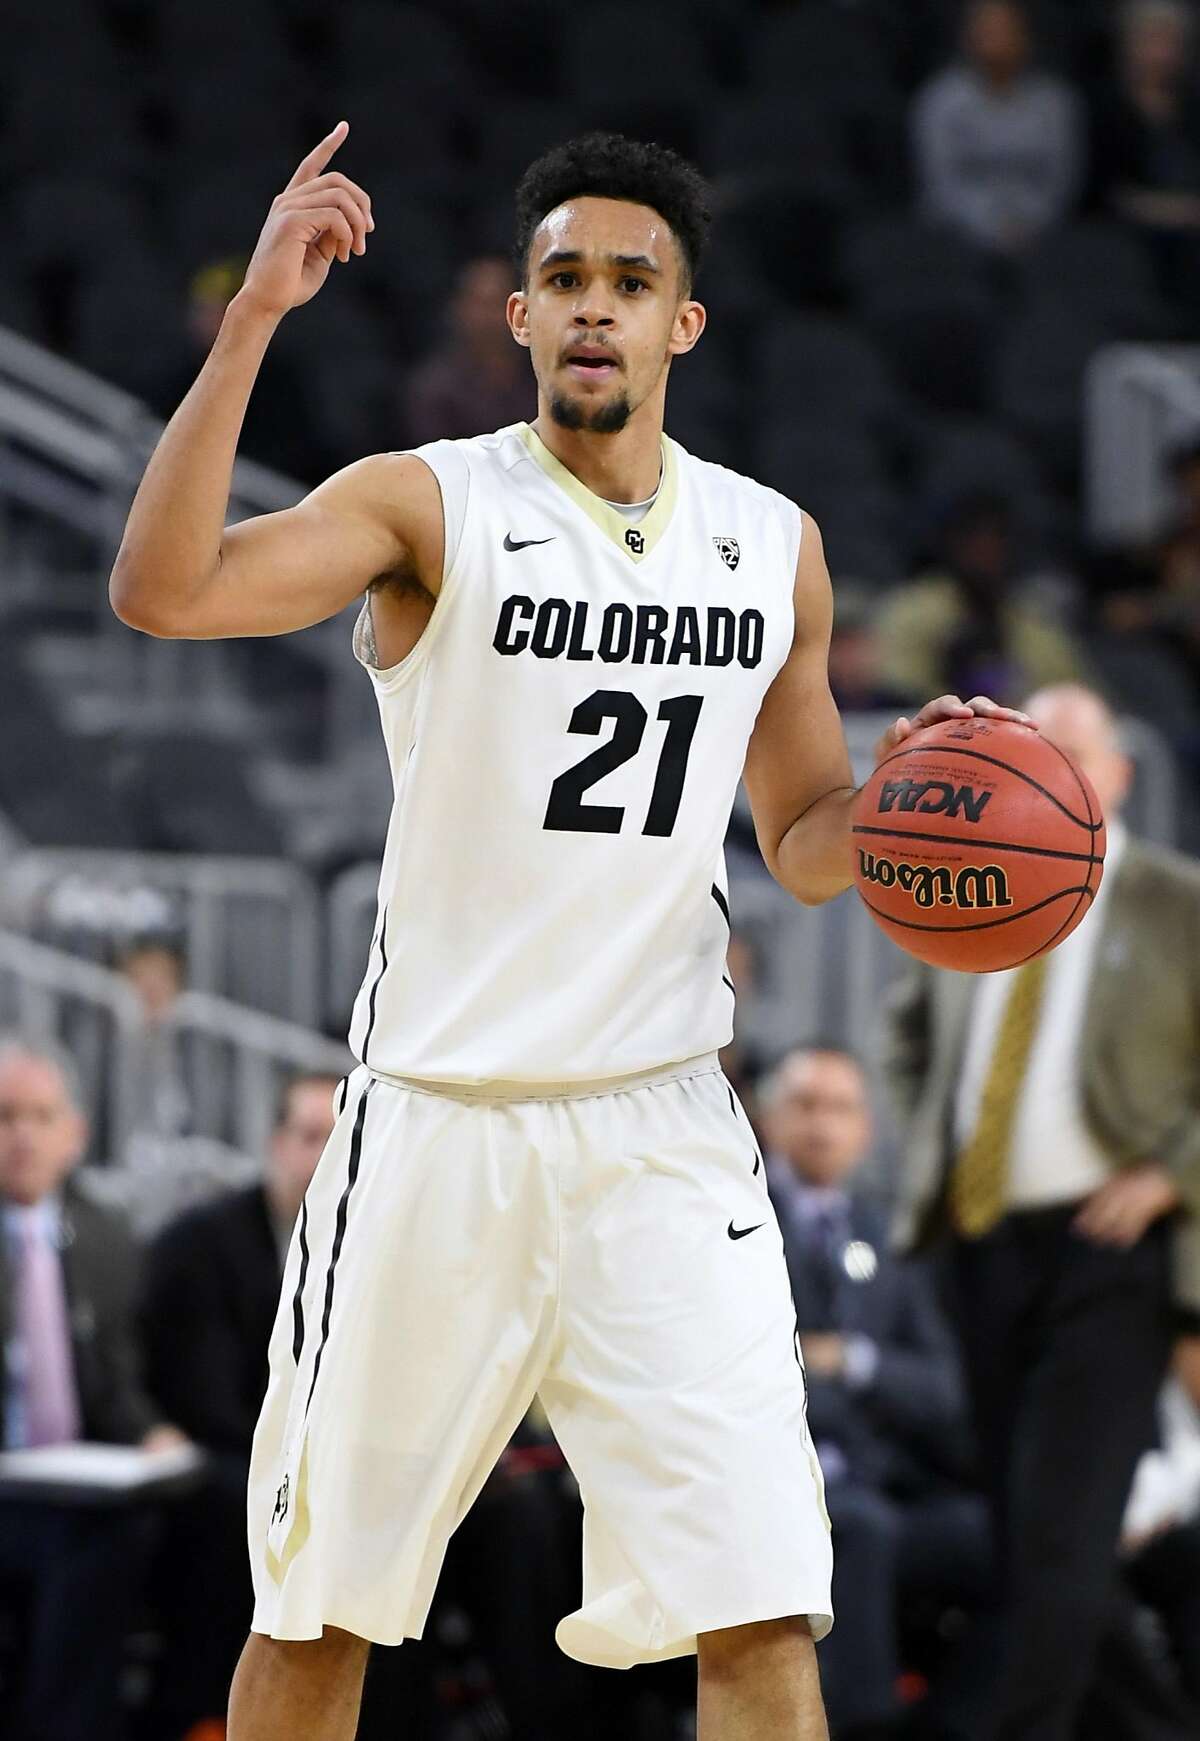 The San Antonio Spurs selected Derrick White, 24, as the 29th pick in the NBA draft Thursday. Click ahead to learn about the newest Spur.